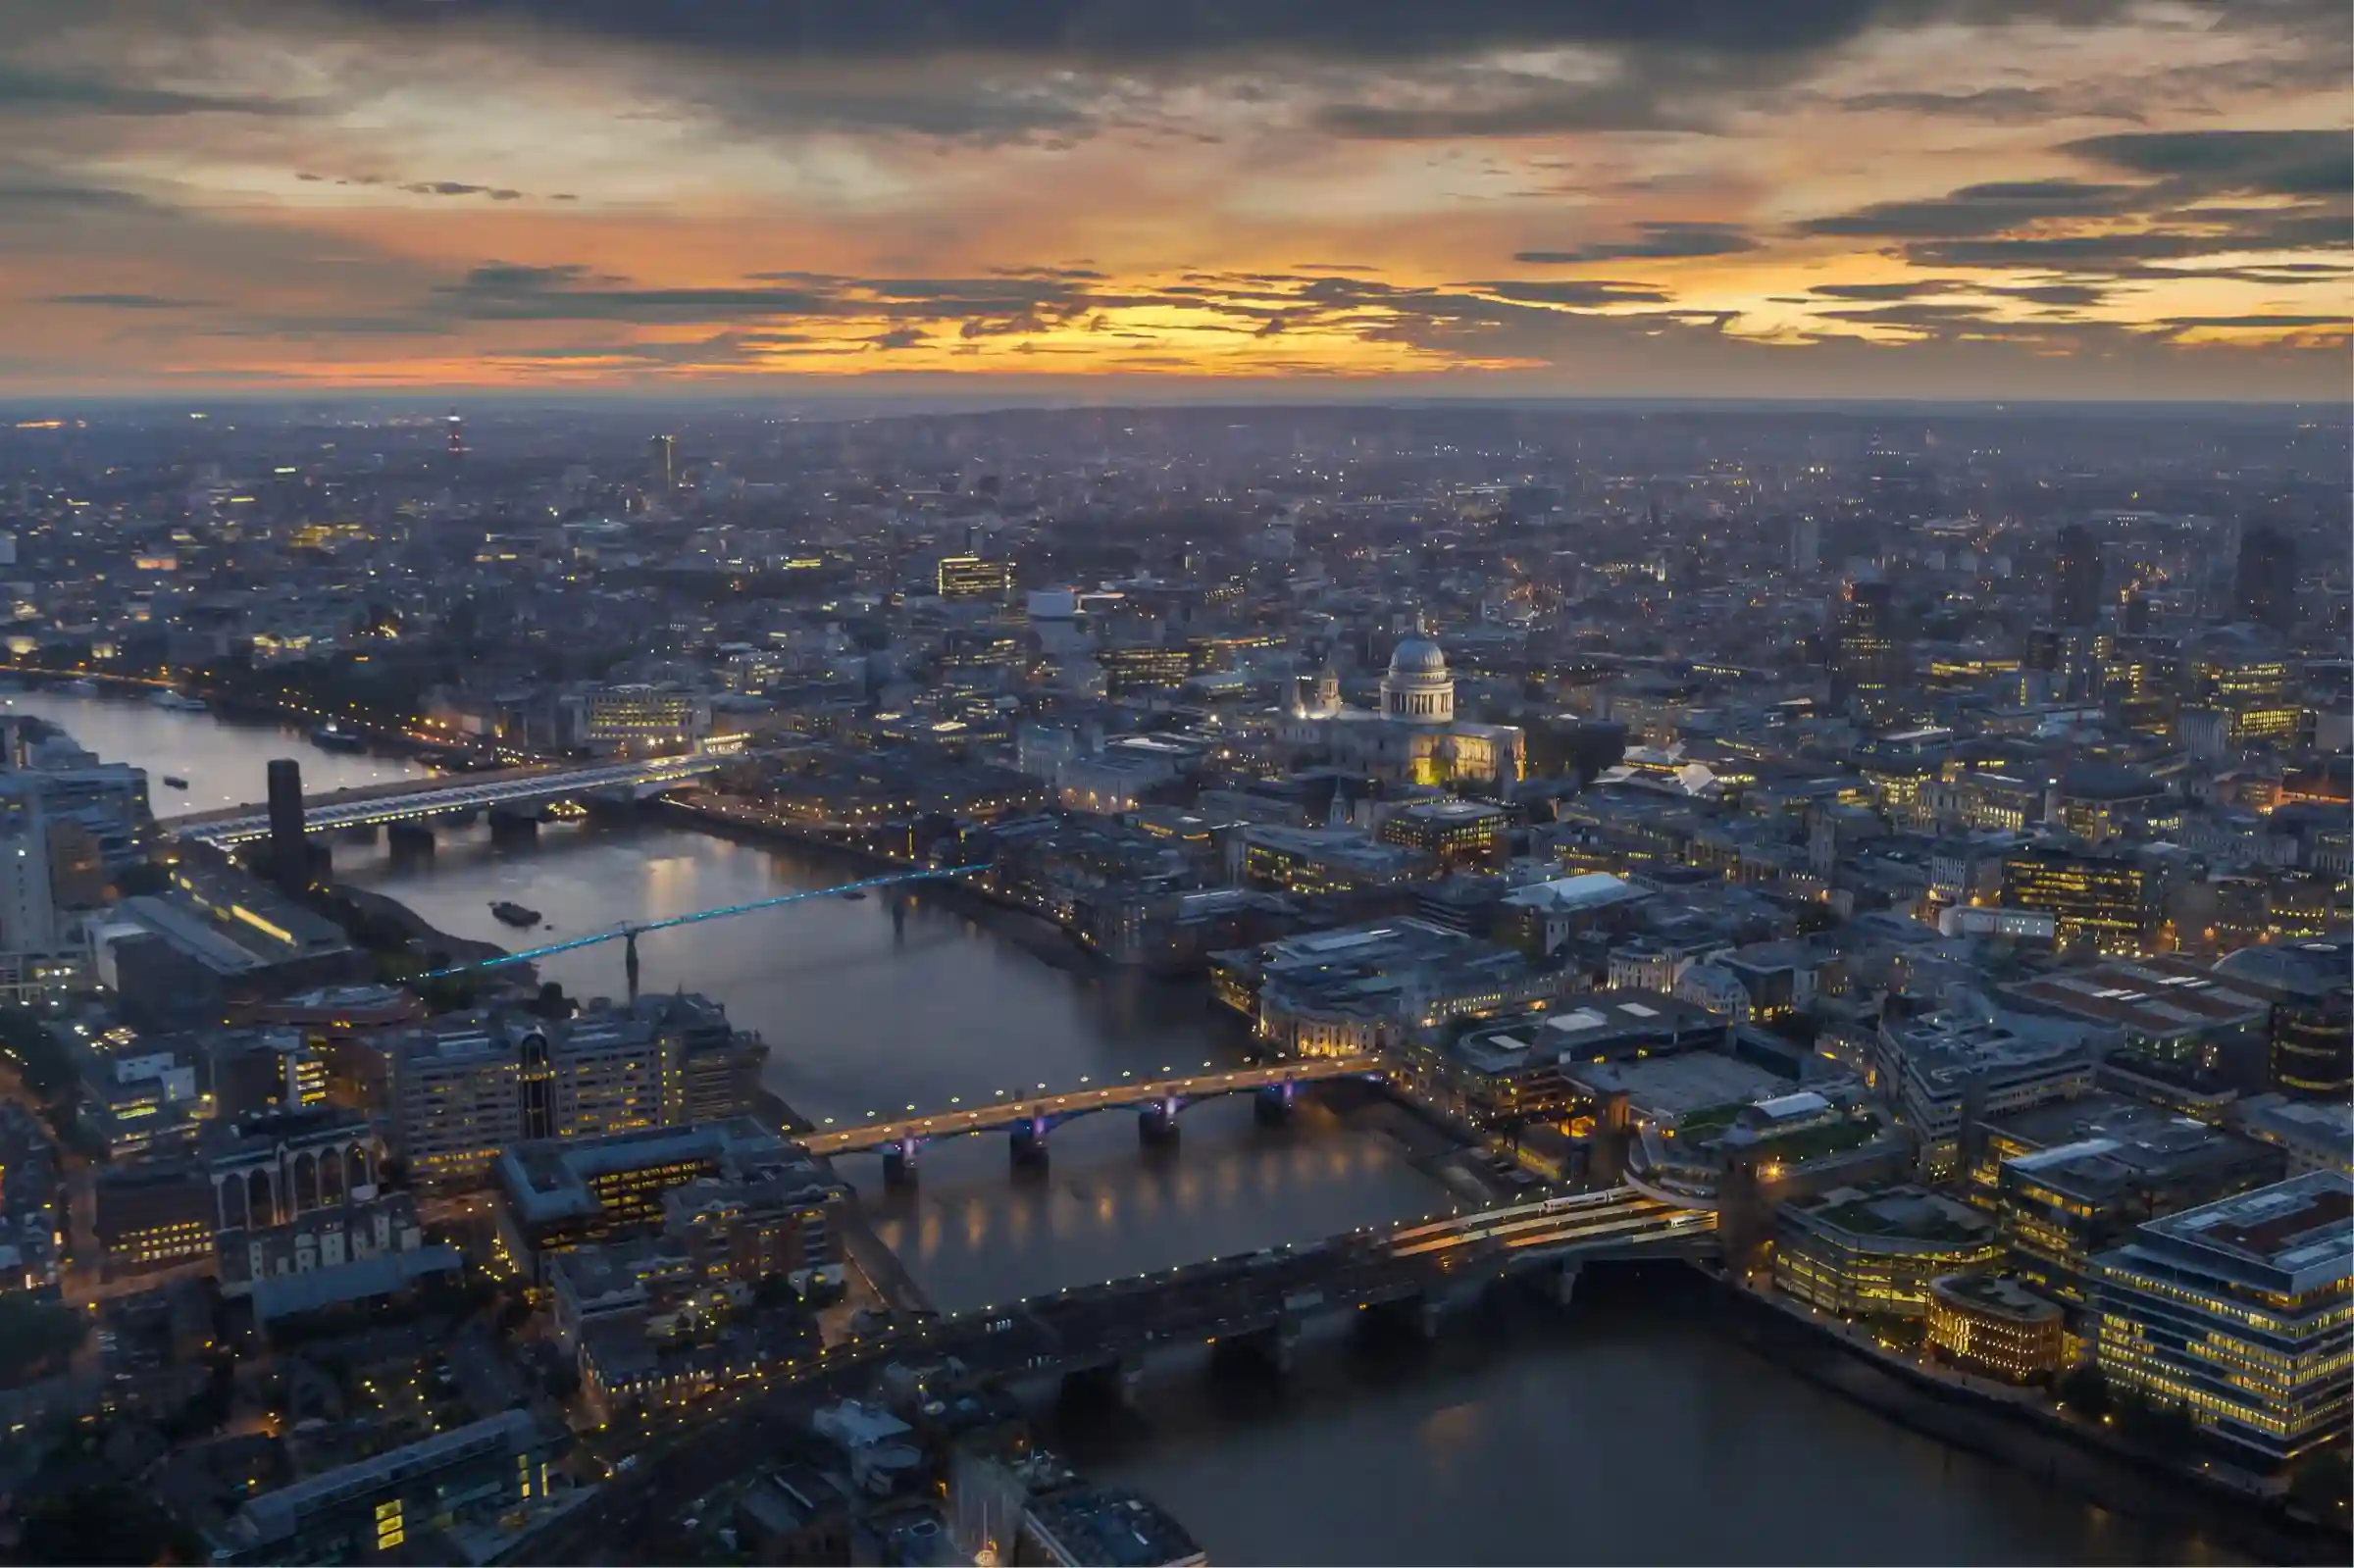 View of London from The Shard